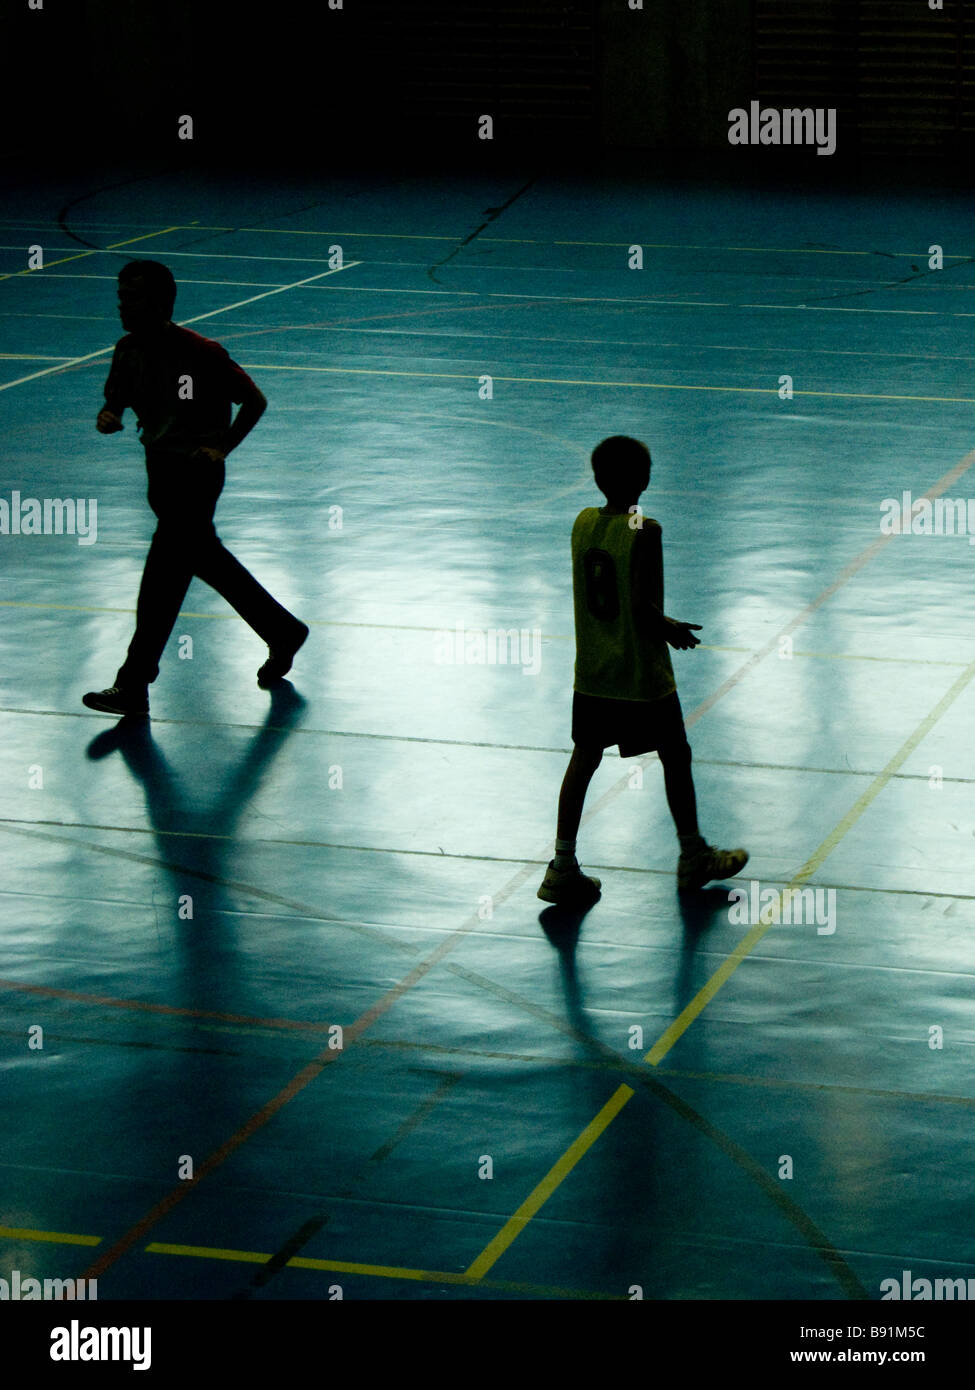 A kid and the referee silhouette during a basketball game. Stock Photo